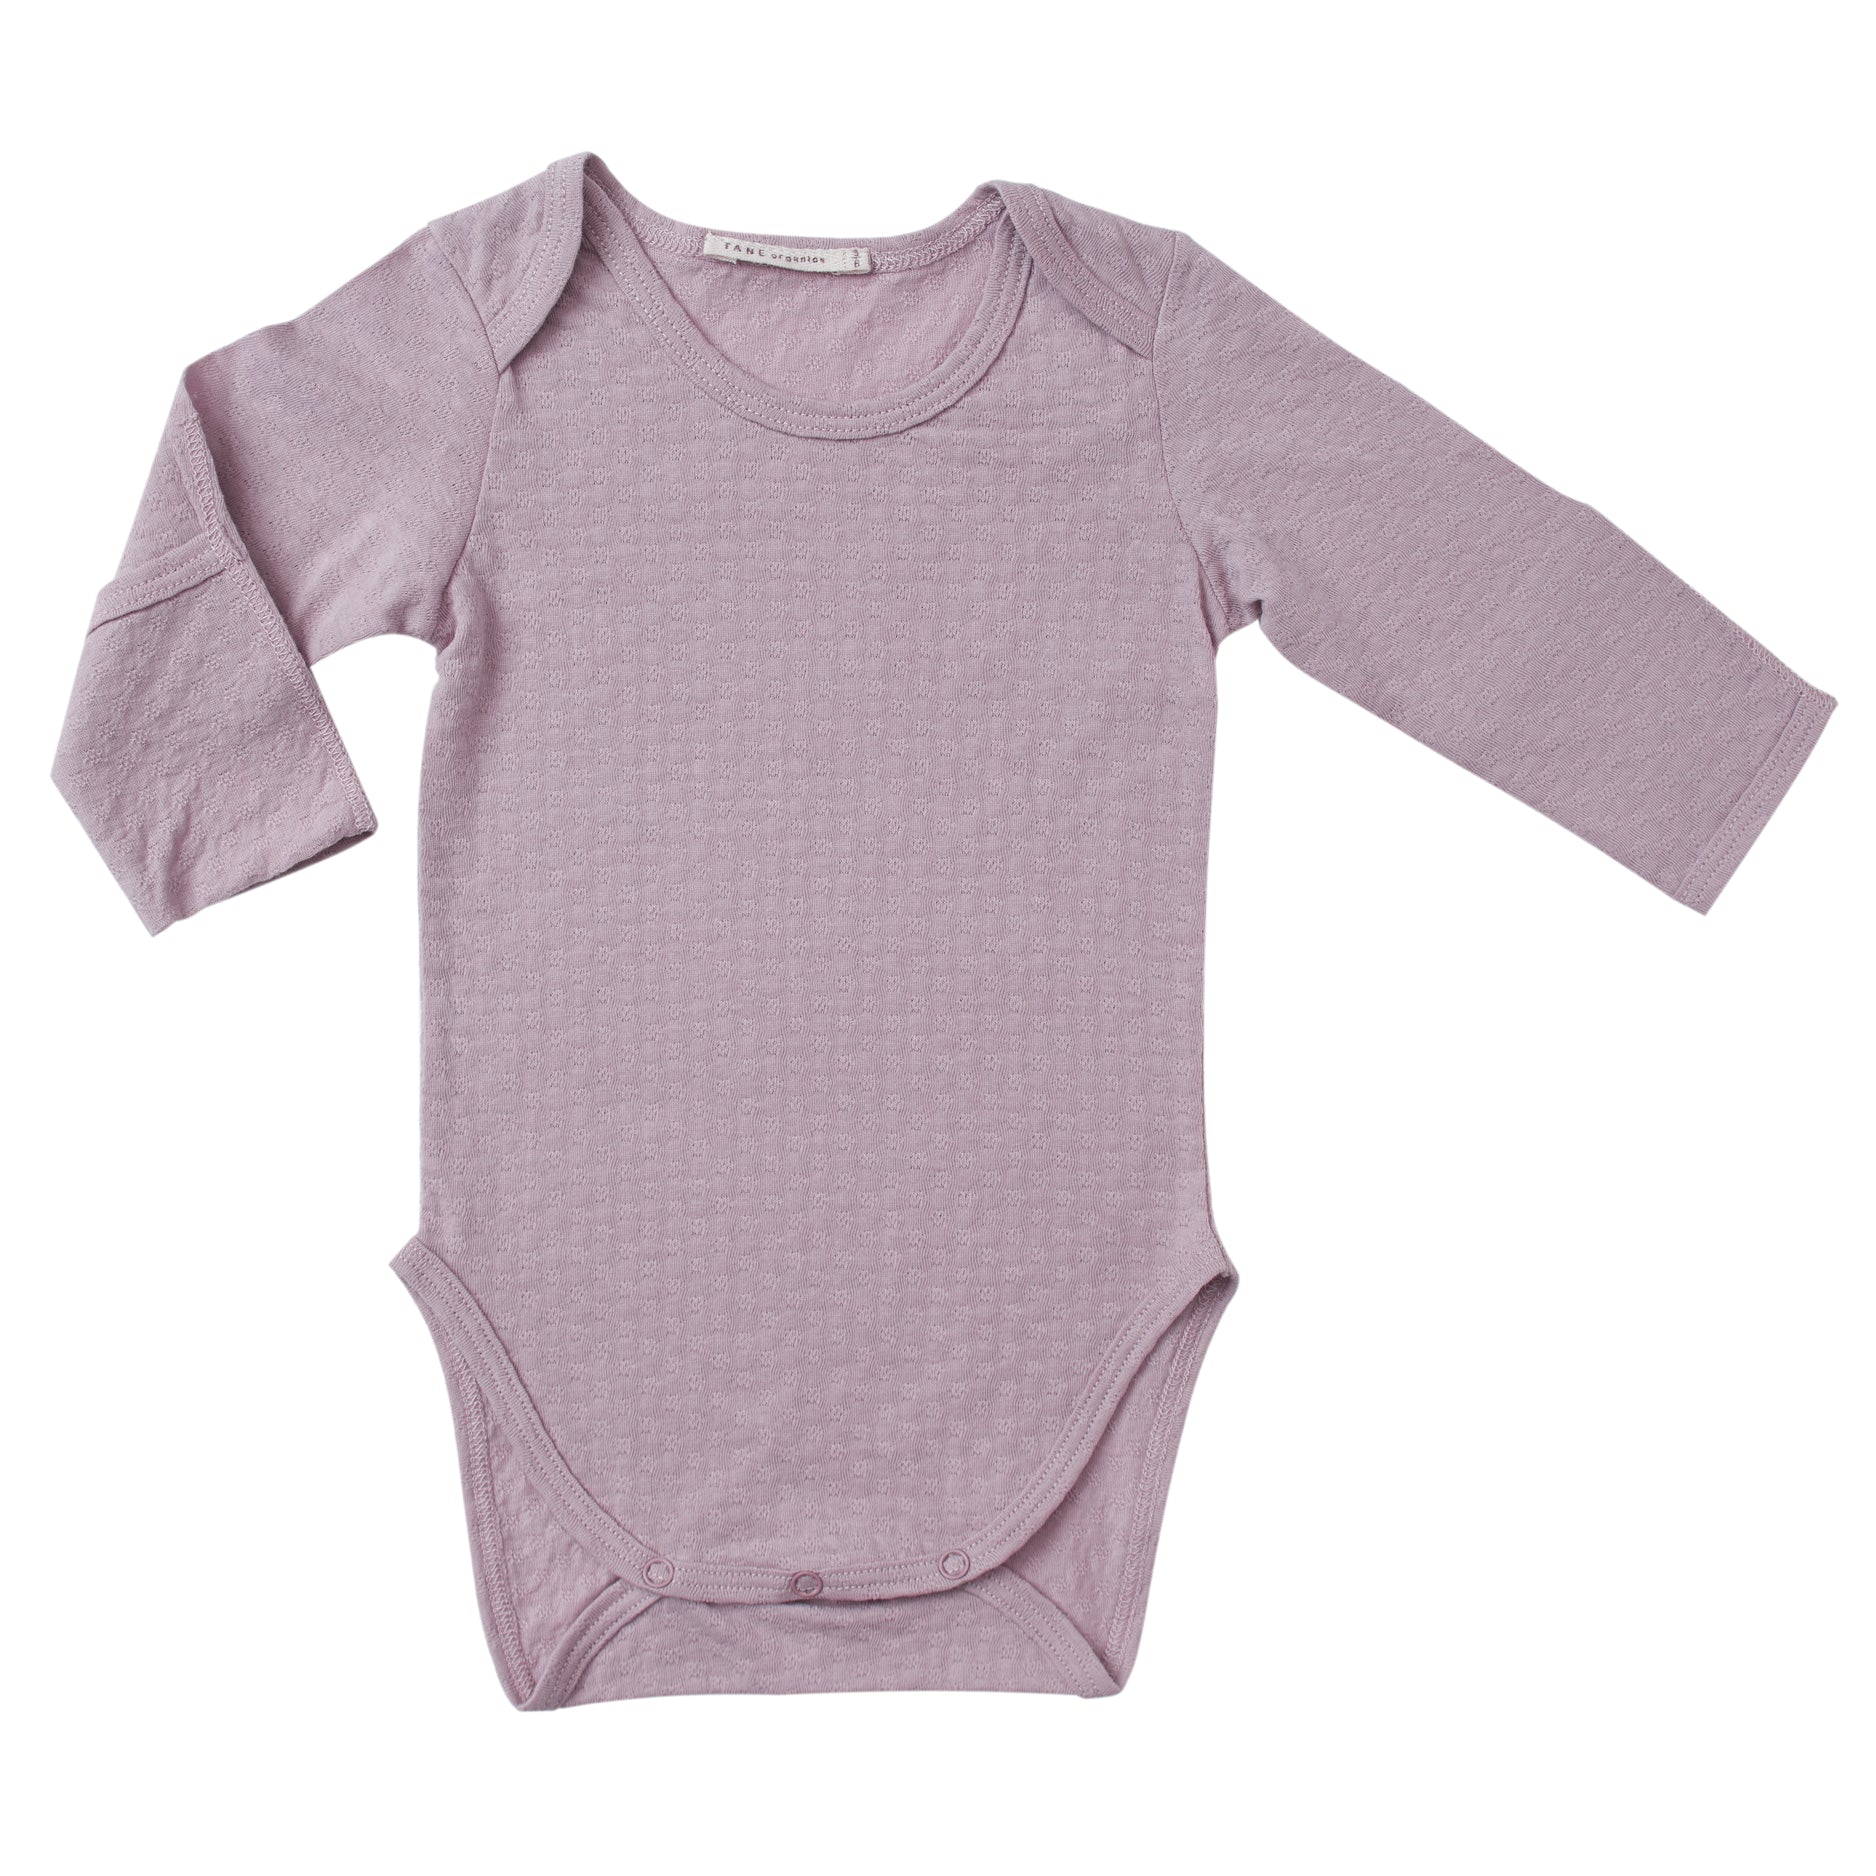 lavender color pointelle essential crewneck onesie with handcover.  100% organic cotton.